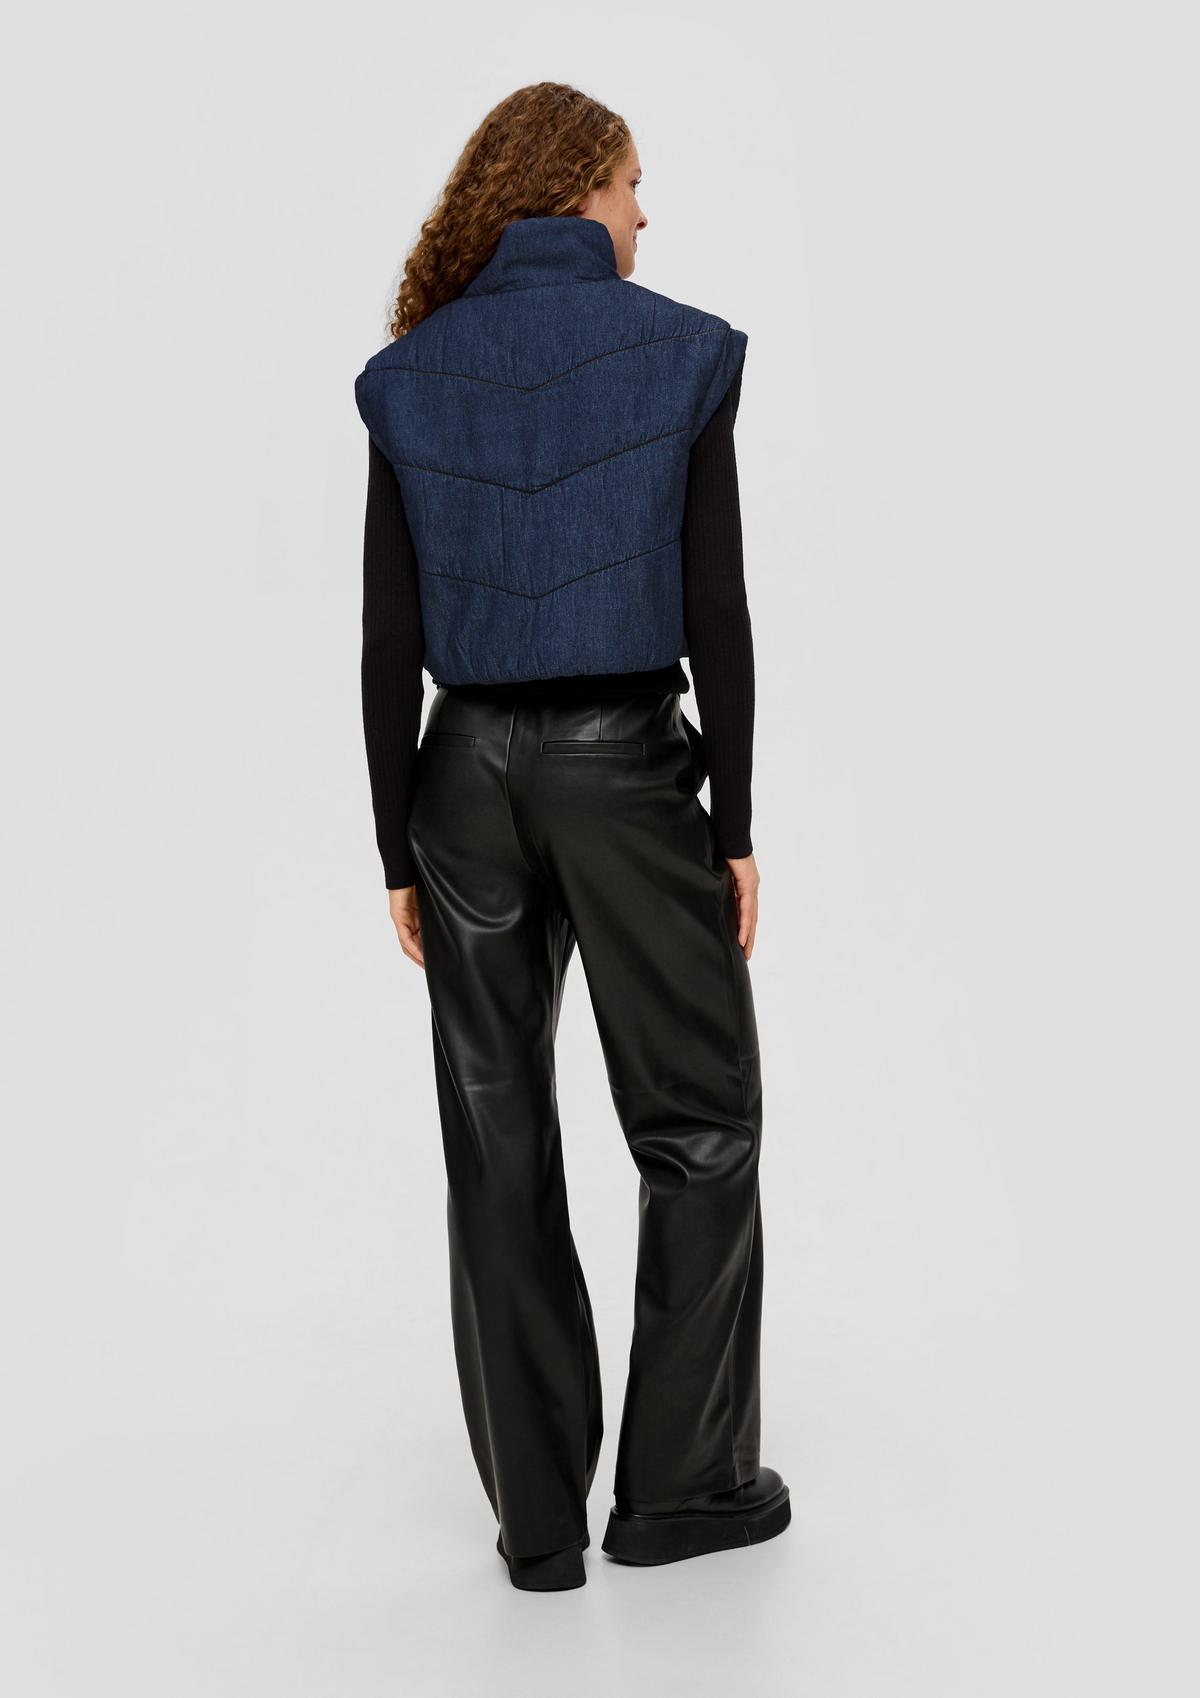 s.Oliver Denim waistcoat with quilting